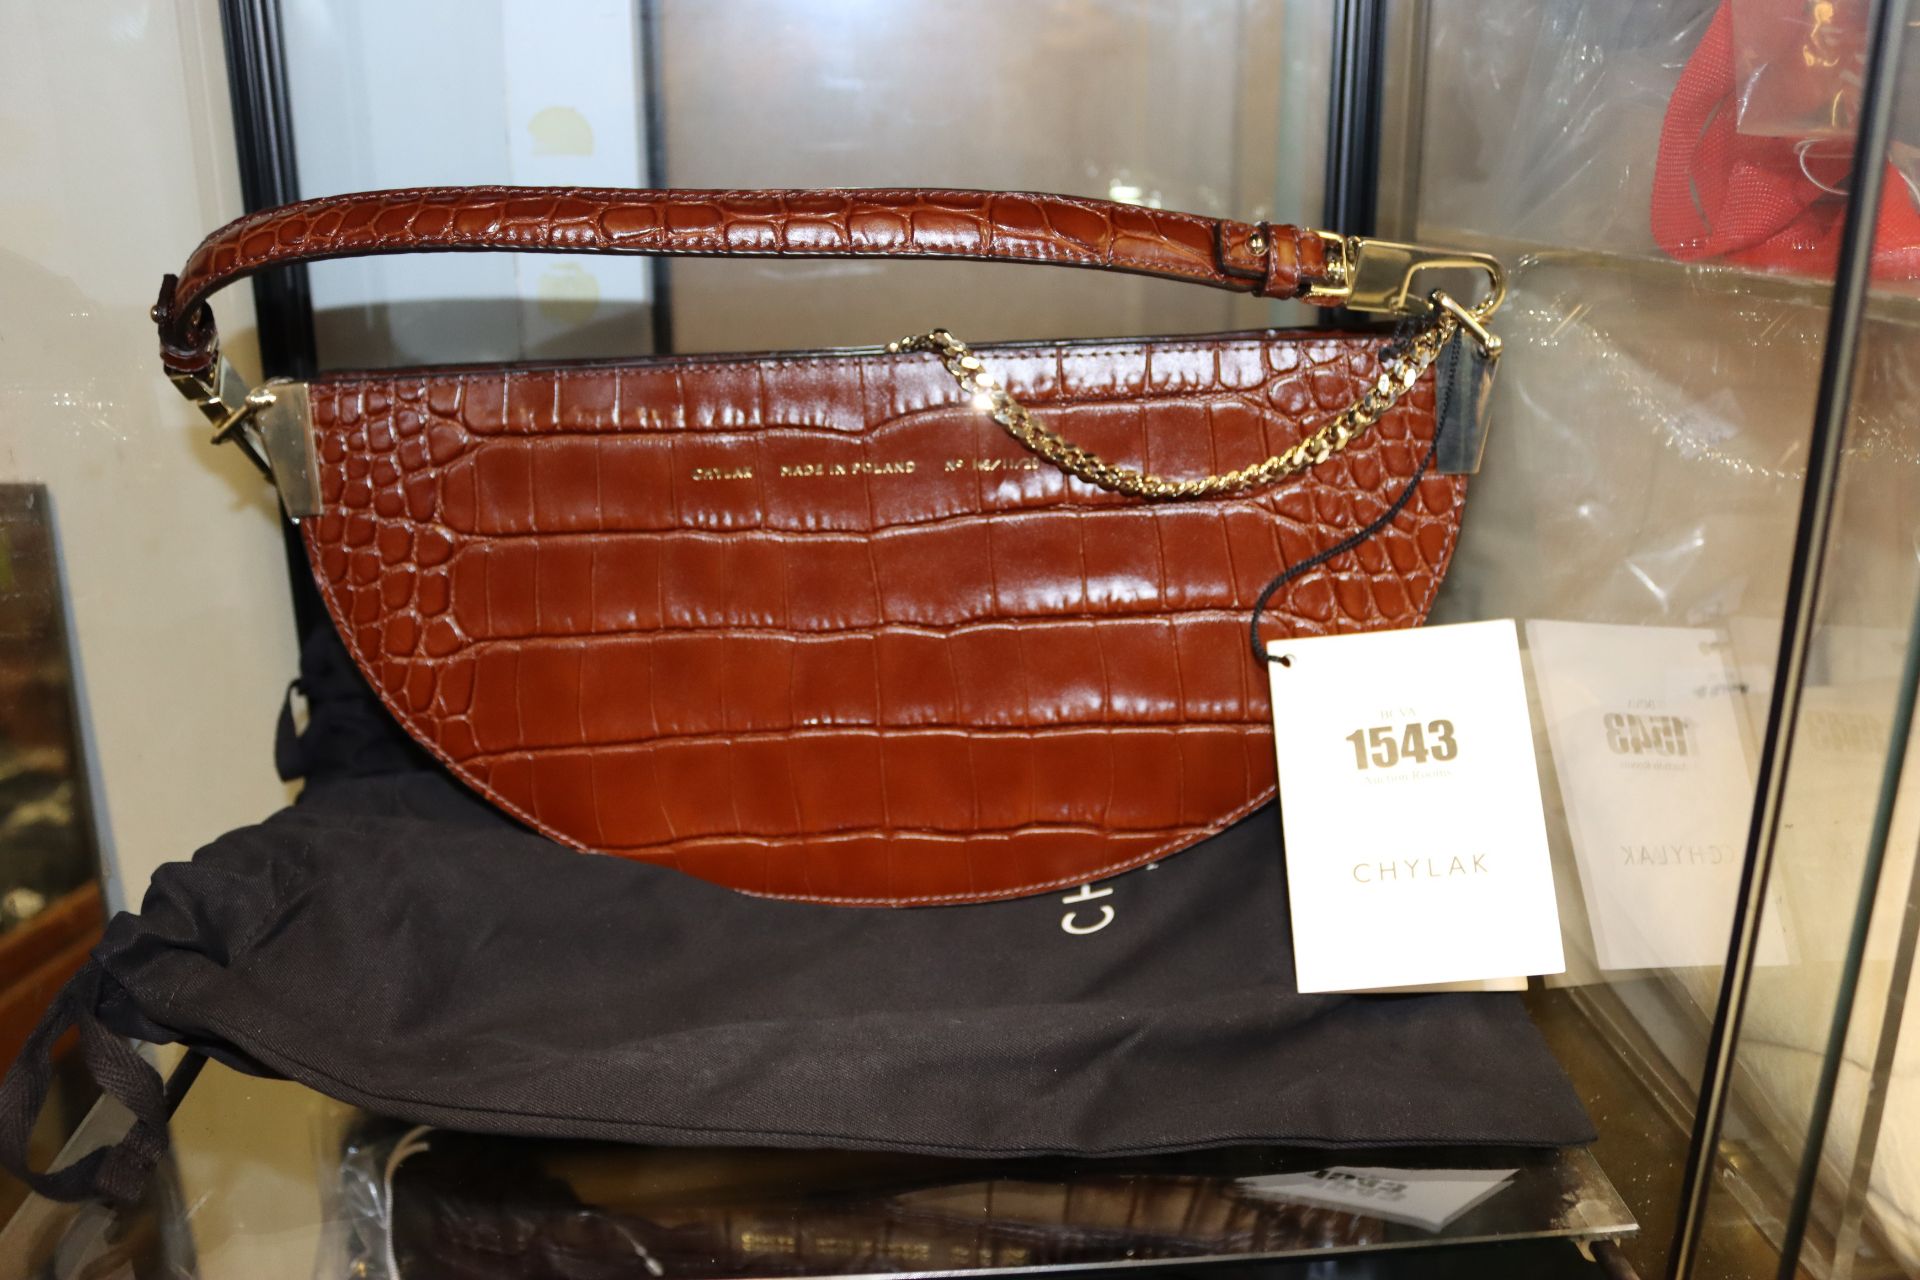 An as new Chylak saddle bag in brown crocodile leather.